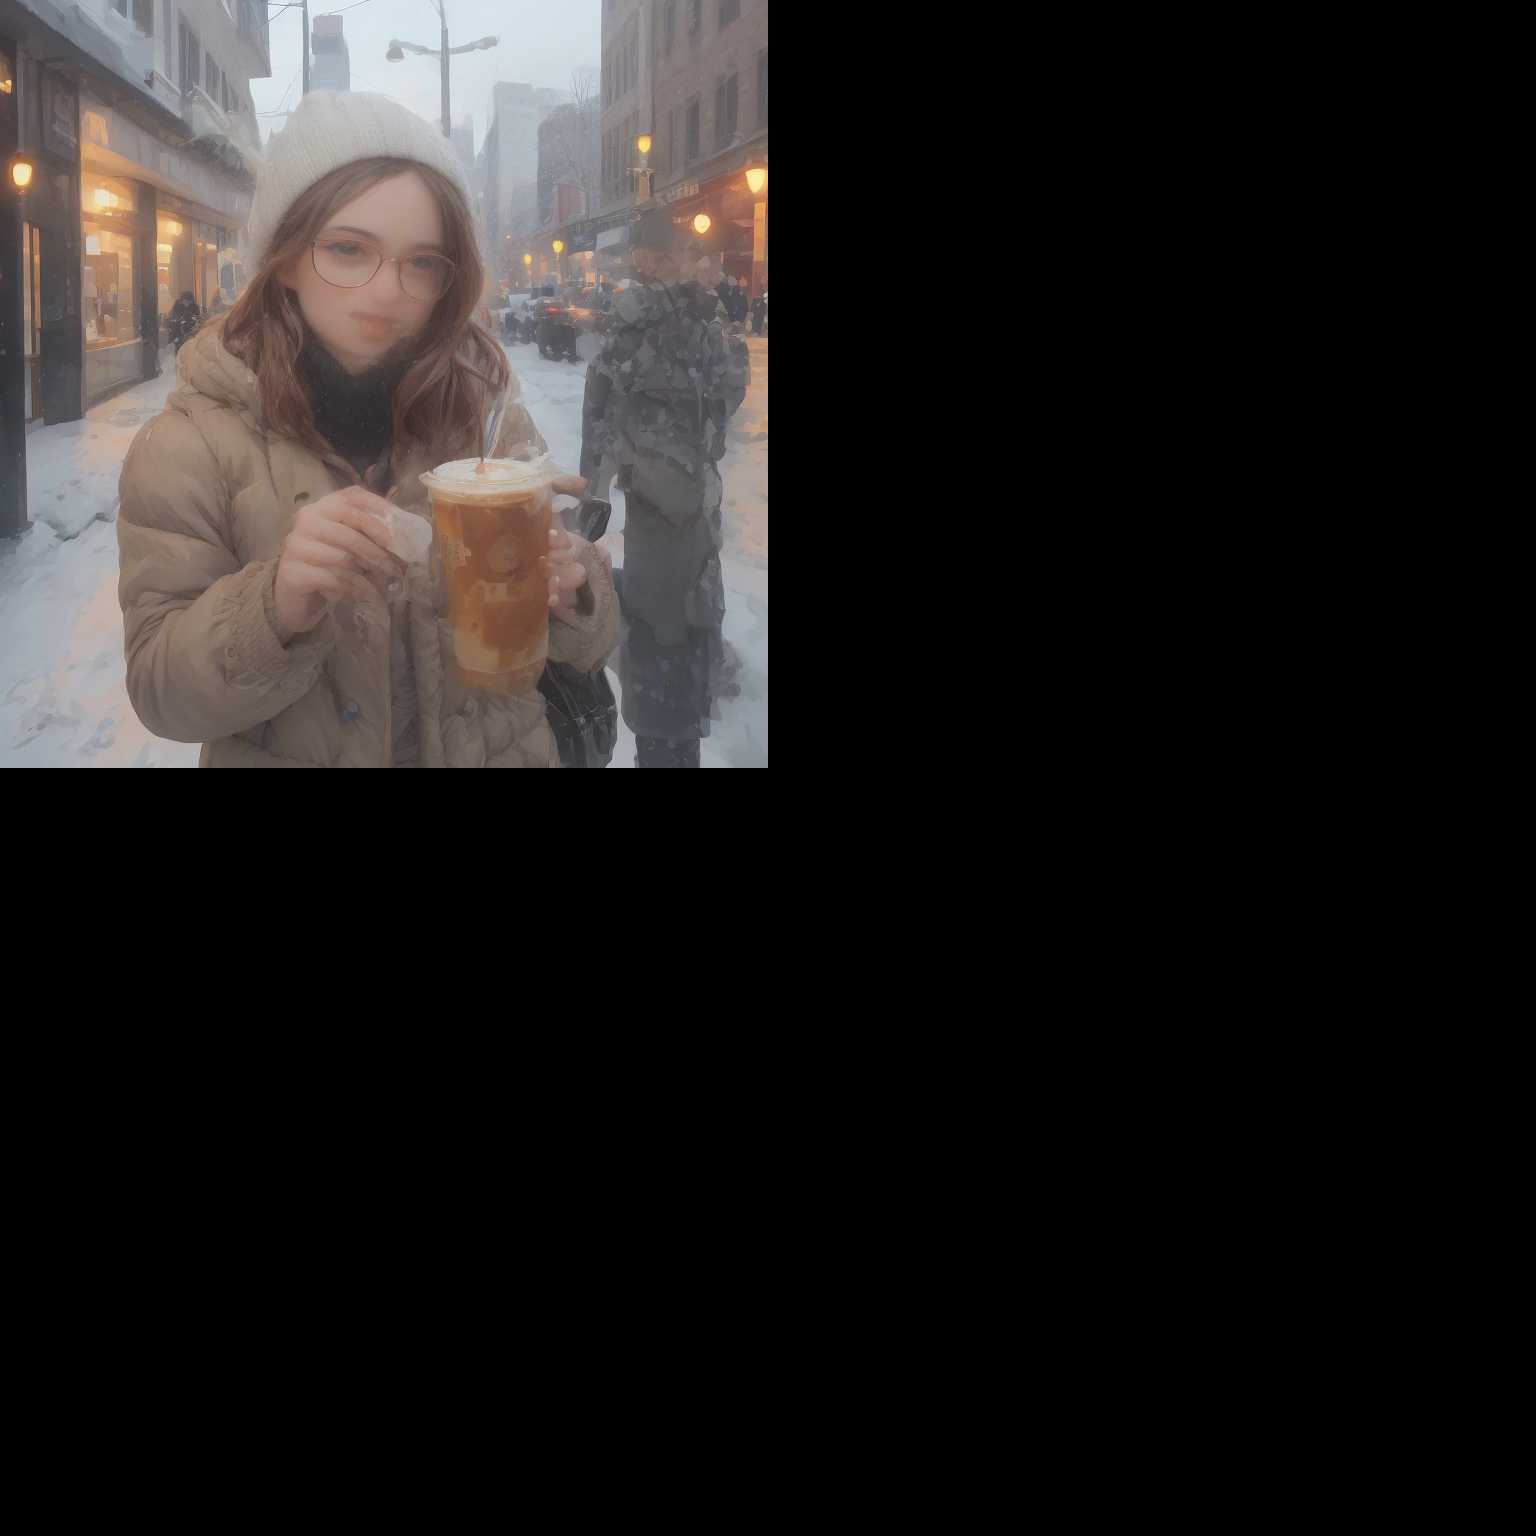 A person with glasses drinking iced coffee in winter